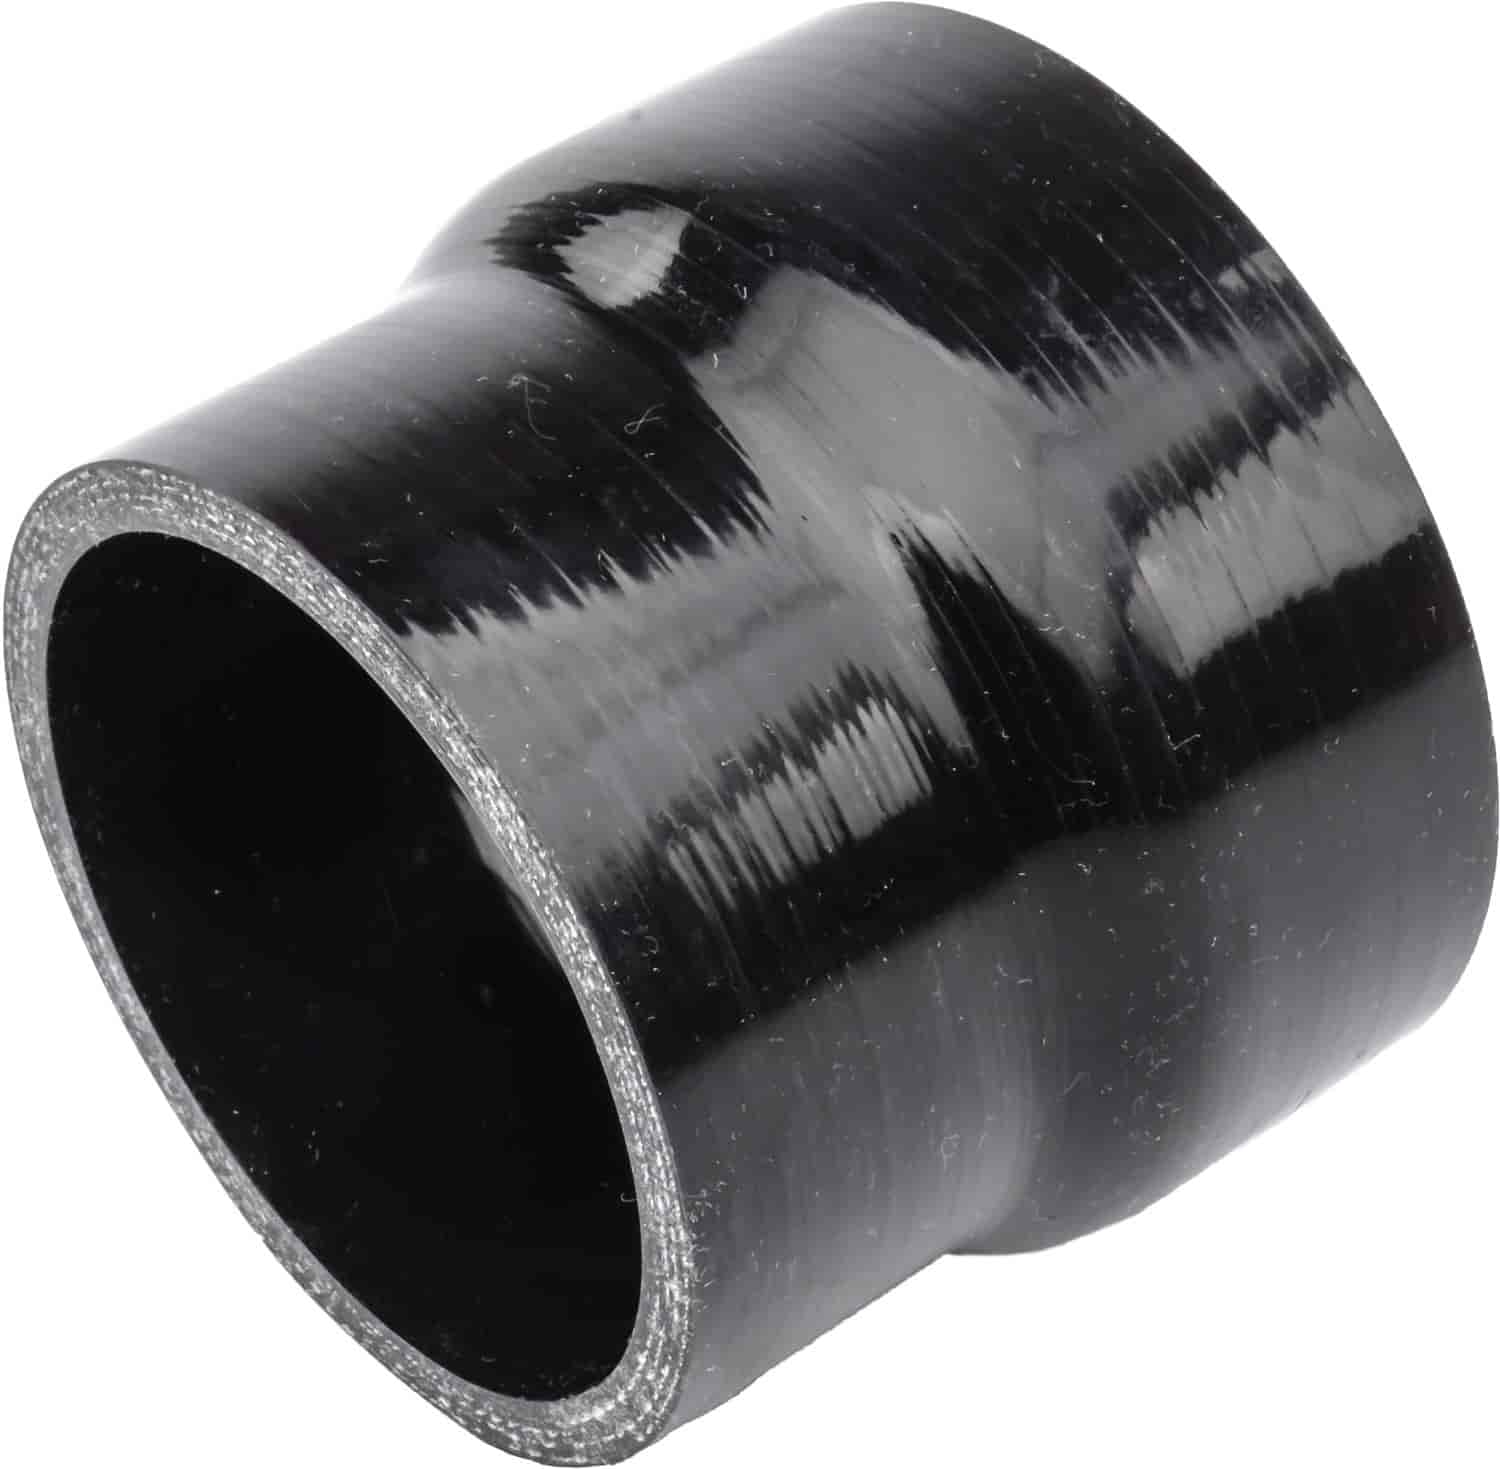 Silicone Hose Connector Reducer 3.5" to 3" x 3" Long